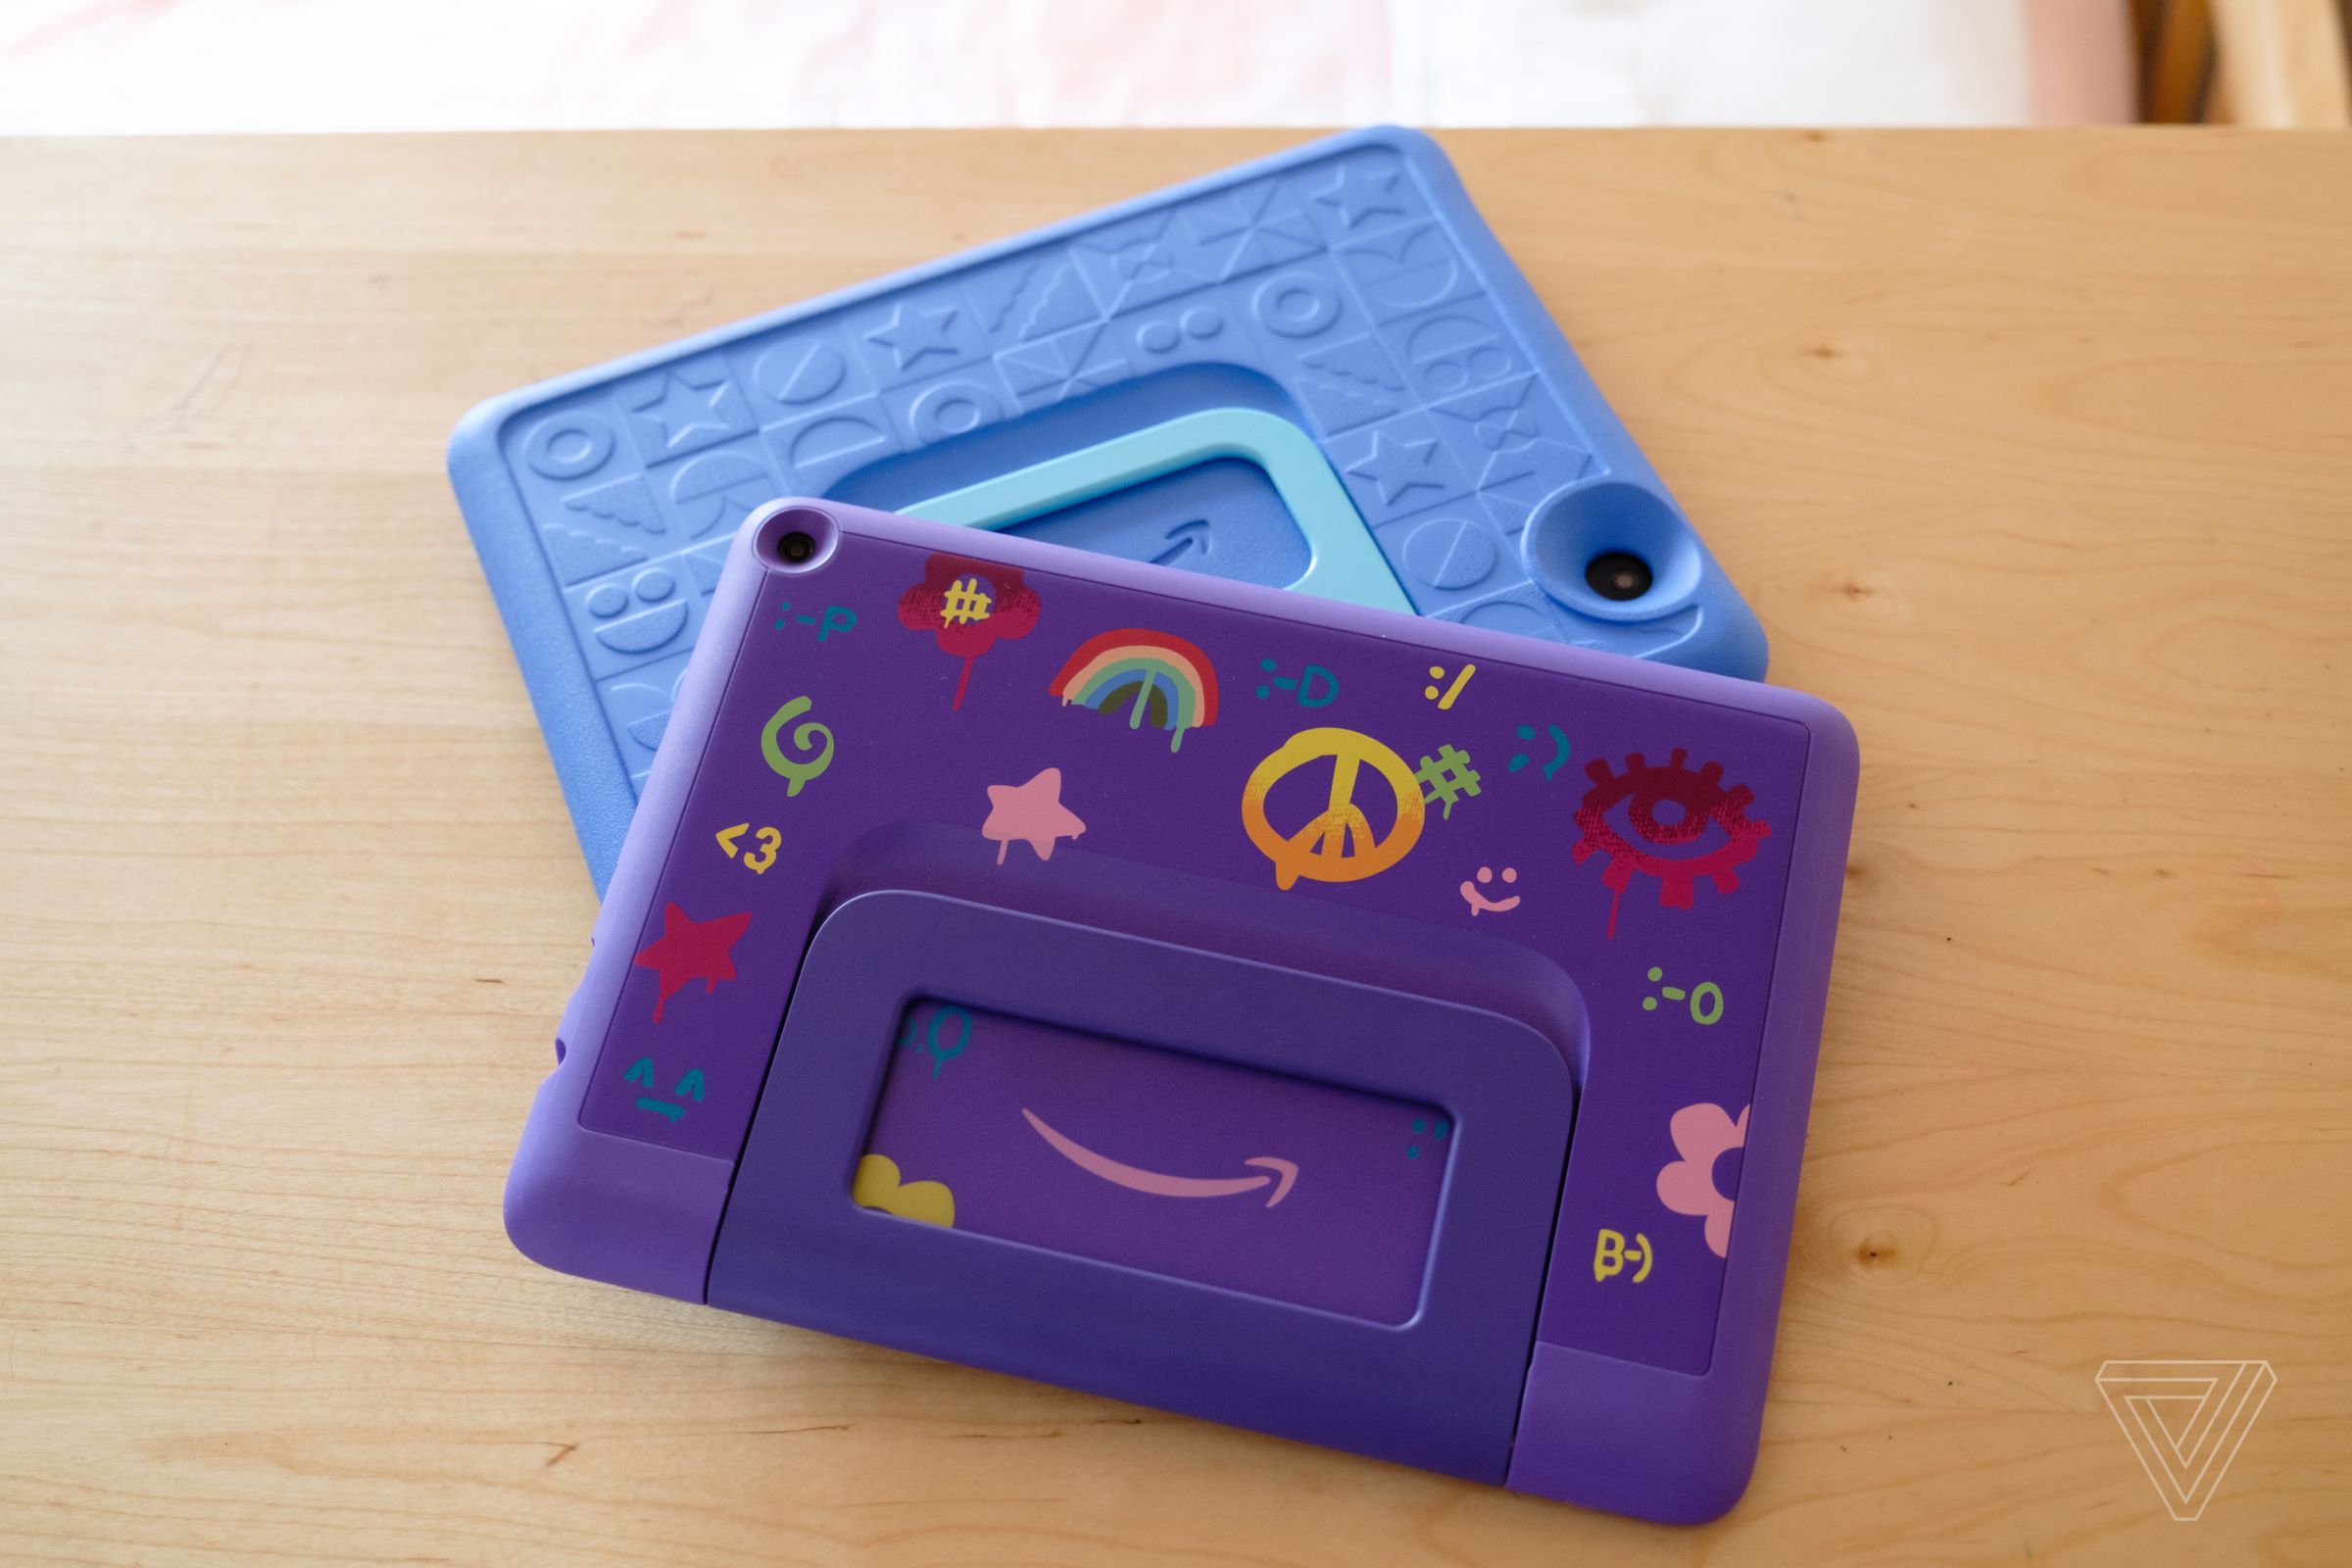 The Kids edition for younger children has a chunky, spongy case; the model for older kids has a slimmer plastic one.